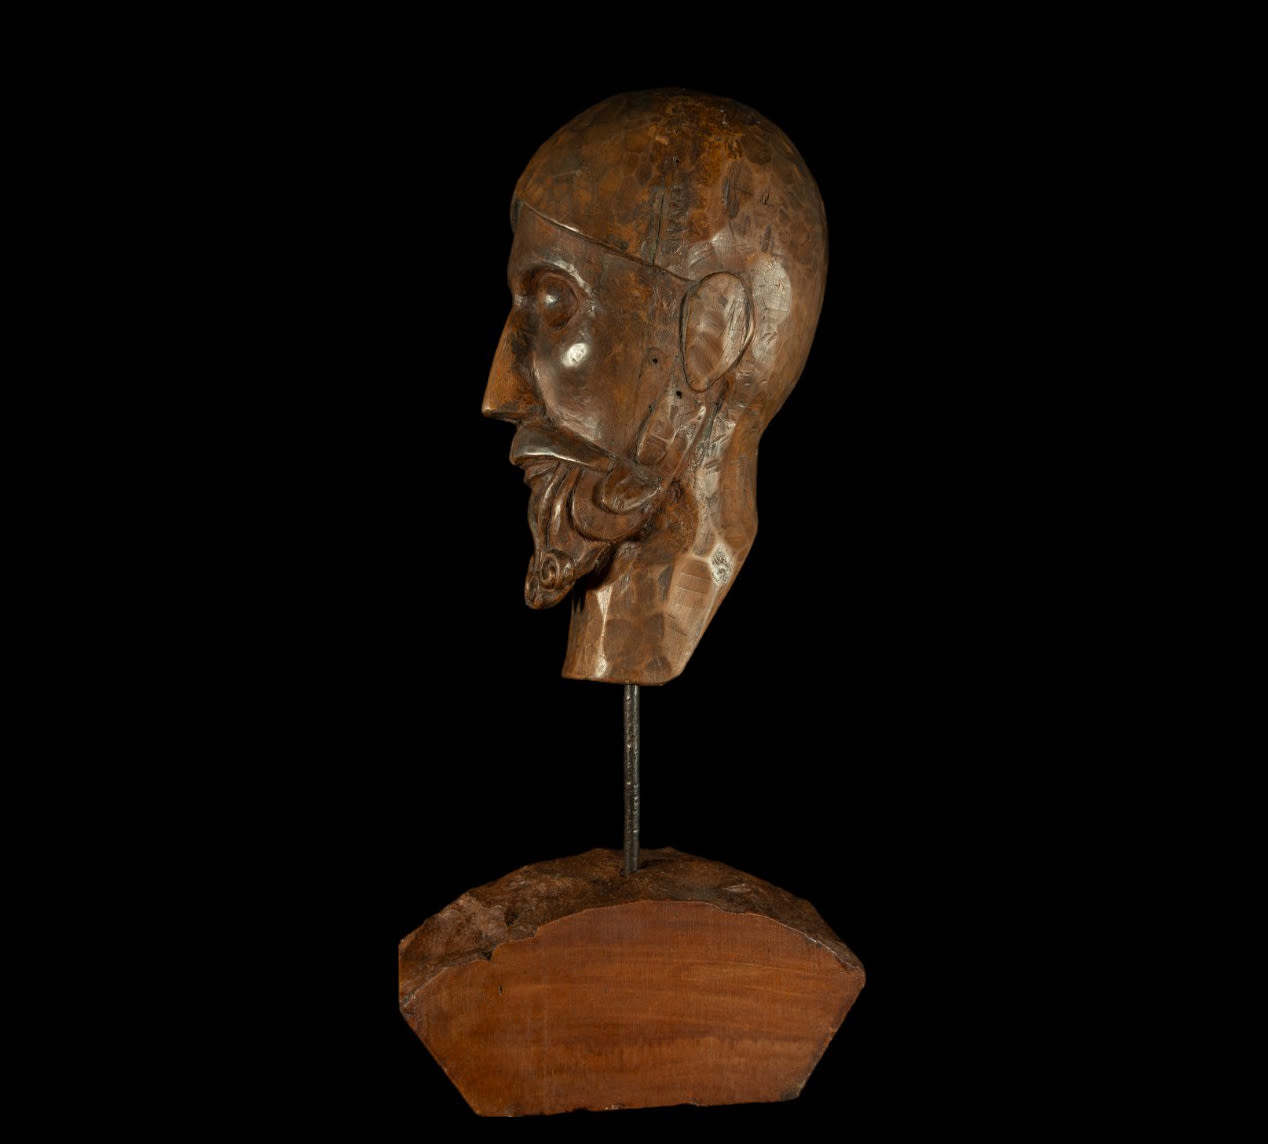 Head of Christ, Goa, Portuguese colonial work from South India, 18th century - Image 2 of 3